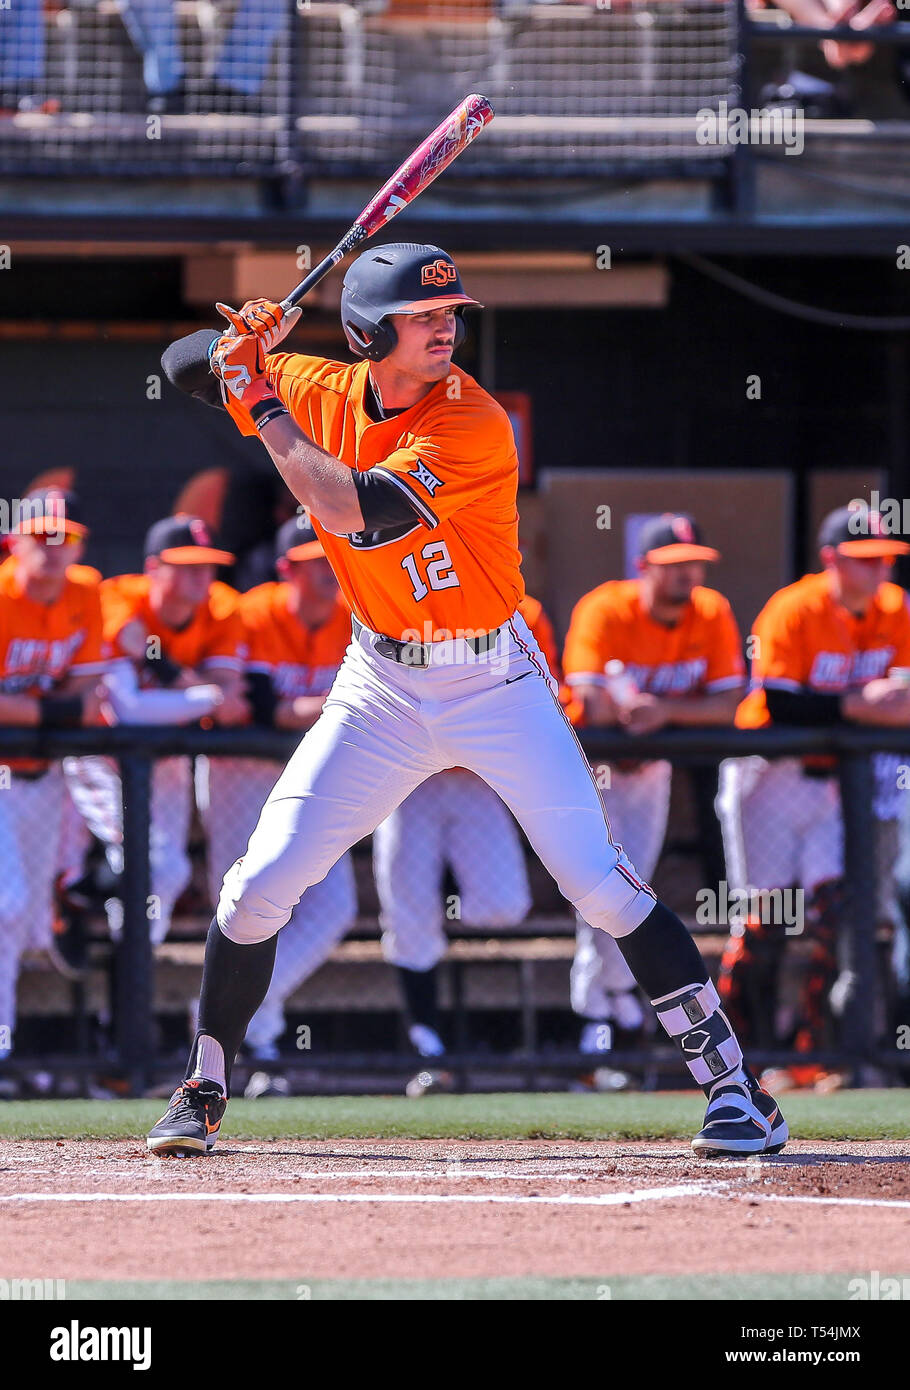 Stillwater, OK, USA. 20th Apr, 2019. Oklahoma State University outfielder Carson McCusker (12) at bat during a baseball game between the University of Texas Longhorns and Oklahoma State Cowboys at Allie P. Reynolds Stadium in Stillwater, OK. Gray Siegel/CSM/Alamy Live News Stock Photo